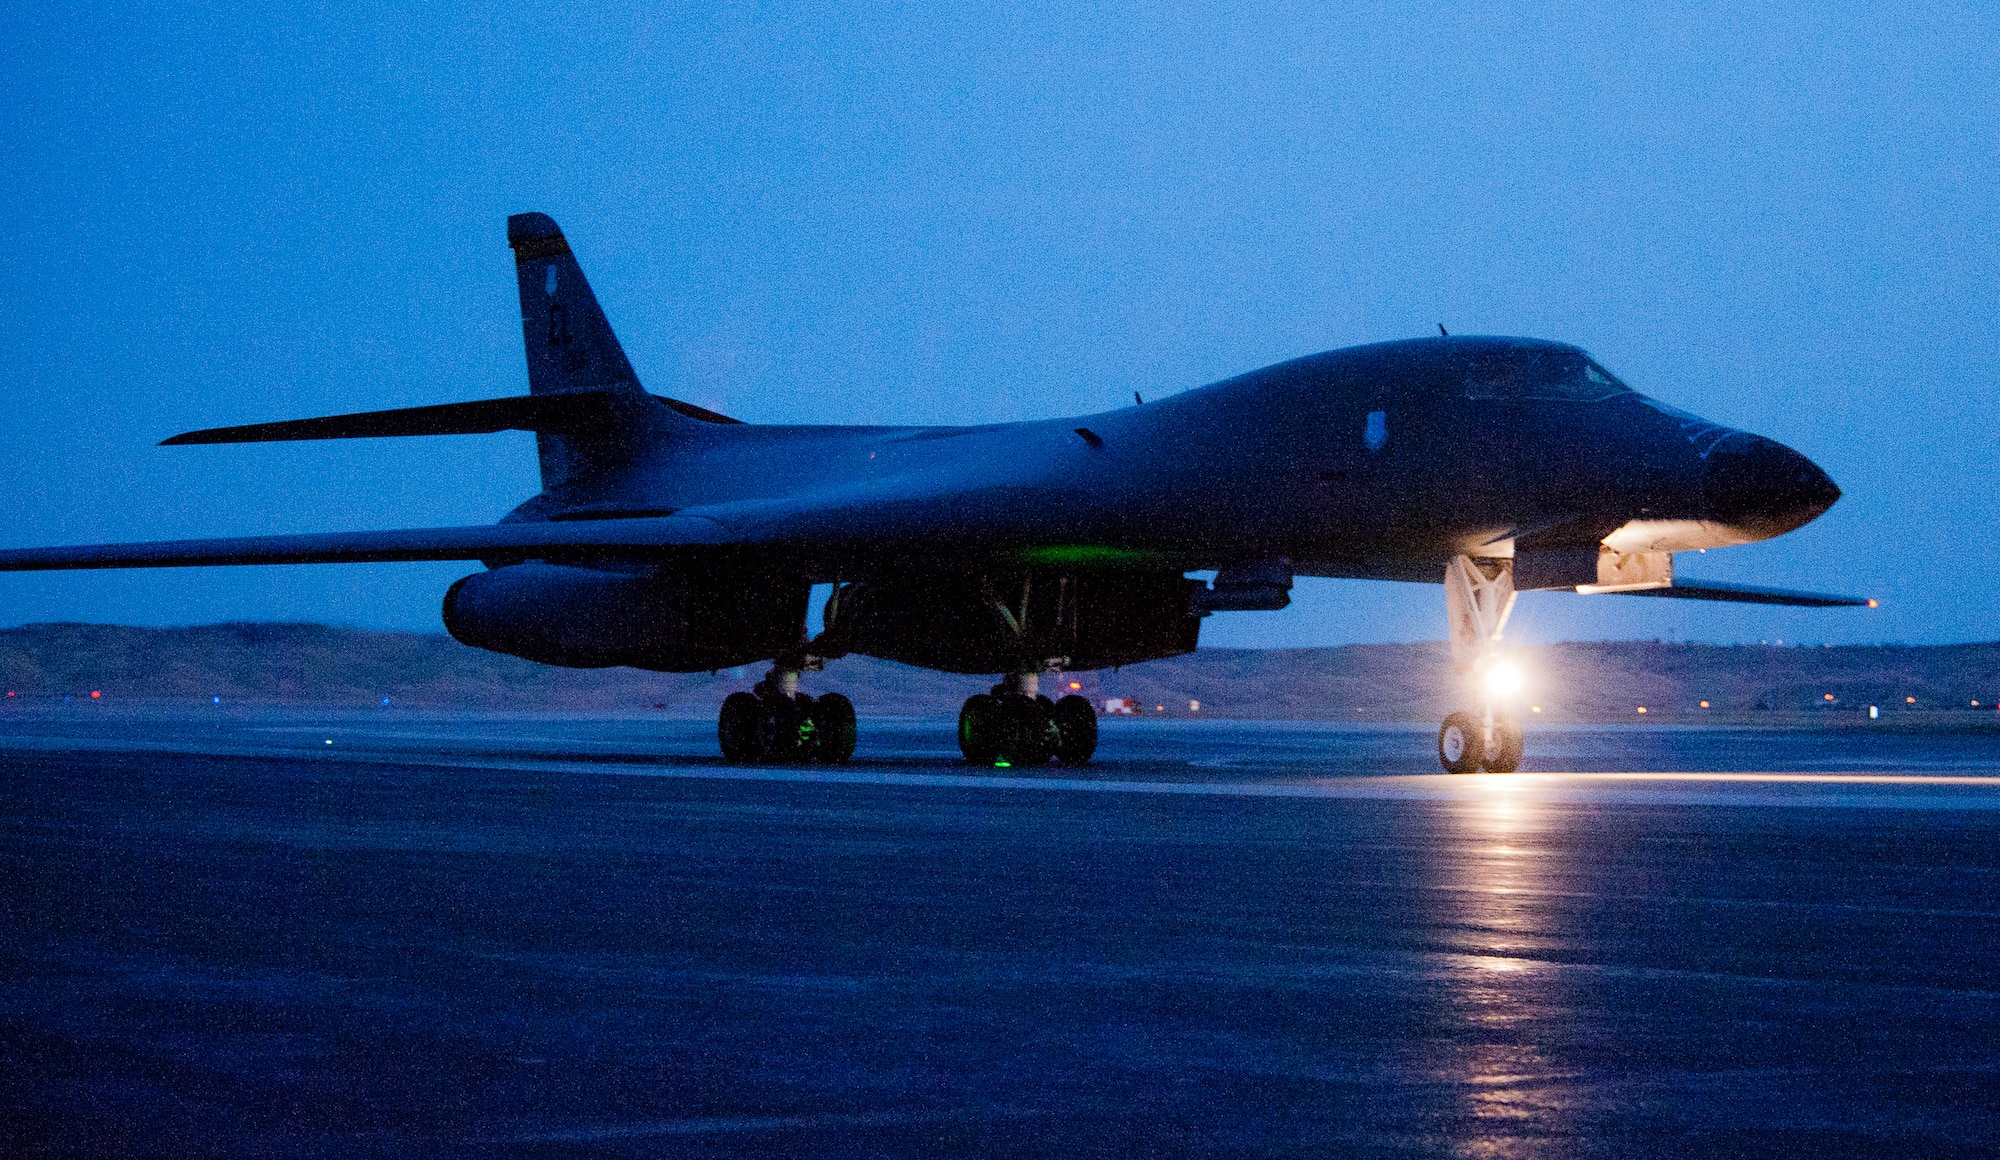 A B-1 bomber taxis off the runway at Ellsworth Air Force Base, S.D., April 4, 2012, following a combat training mission over the Fort Yukon Range, Alaska.  The purpose of the exercise was to flex all major muscle movements part of a long range strike exercise. (U.S. Air Force photo by Airman 1st Class Kate Thornton/Released)